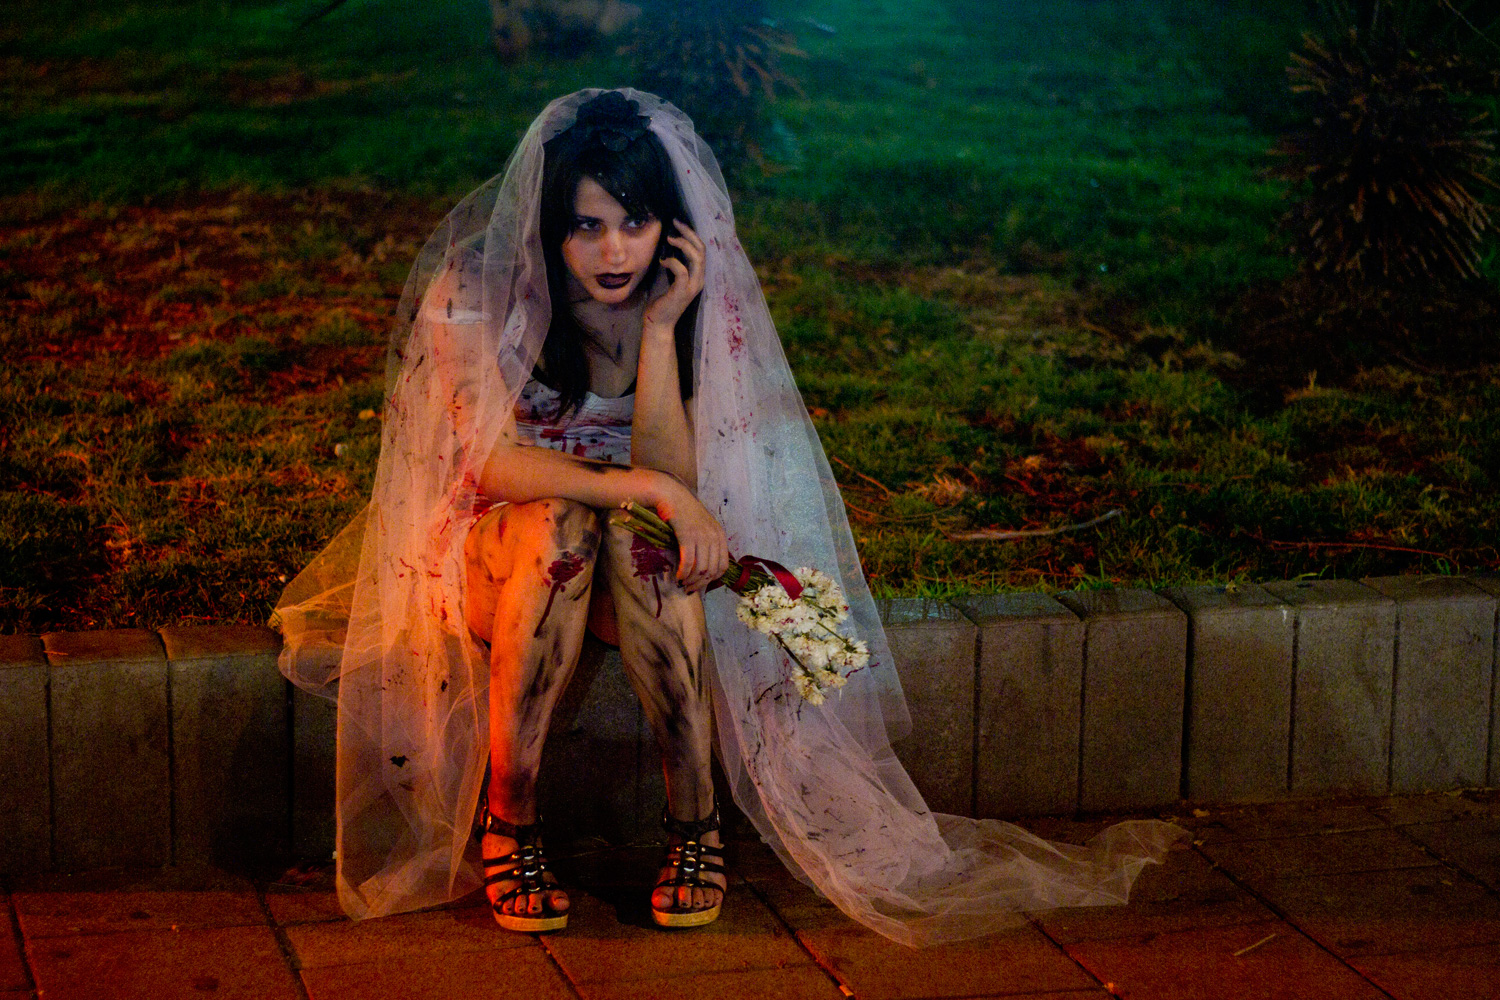 March 6, 2012. A woman wearing zombie make-up and a wedding dress speaks on the phone while waiting for a friend to join the 2012 Zombie Walk during the Purim festival in Tel Aviv.